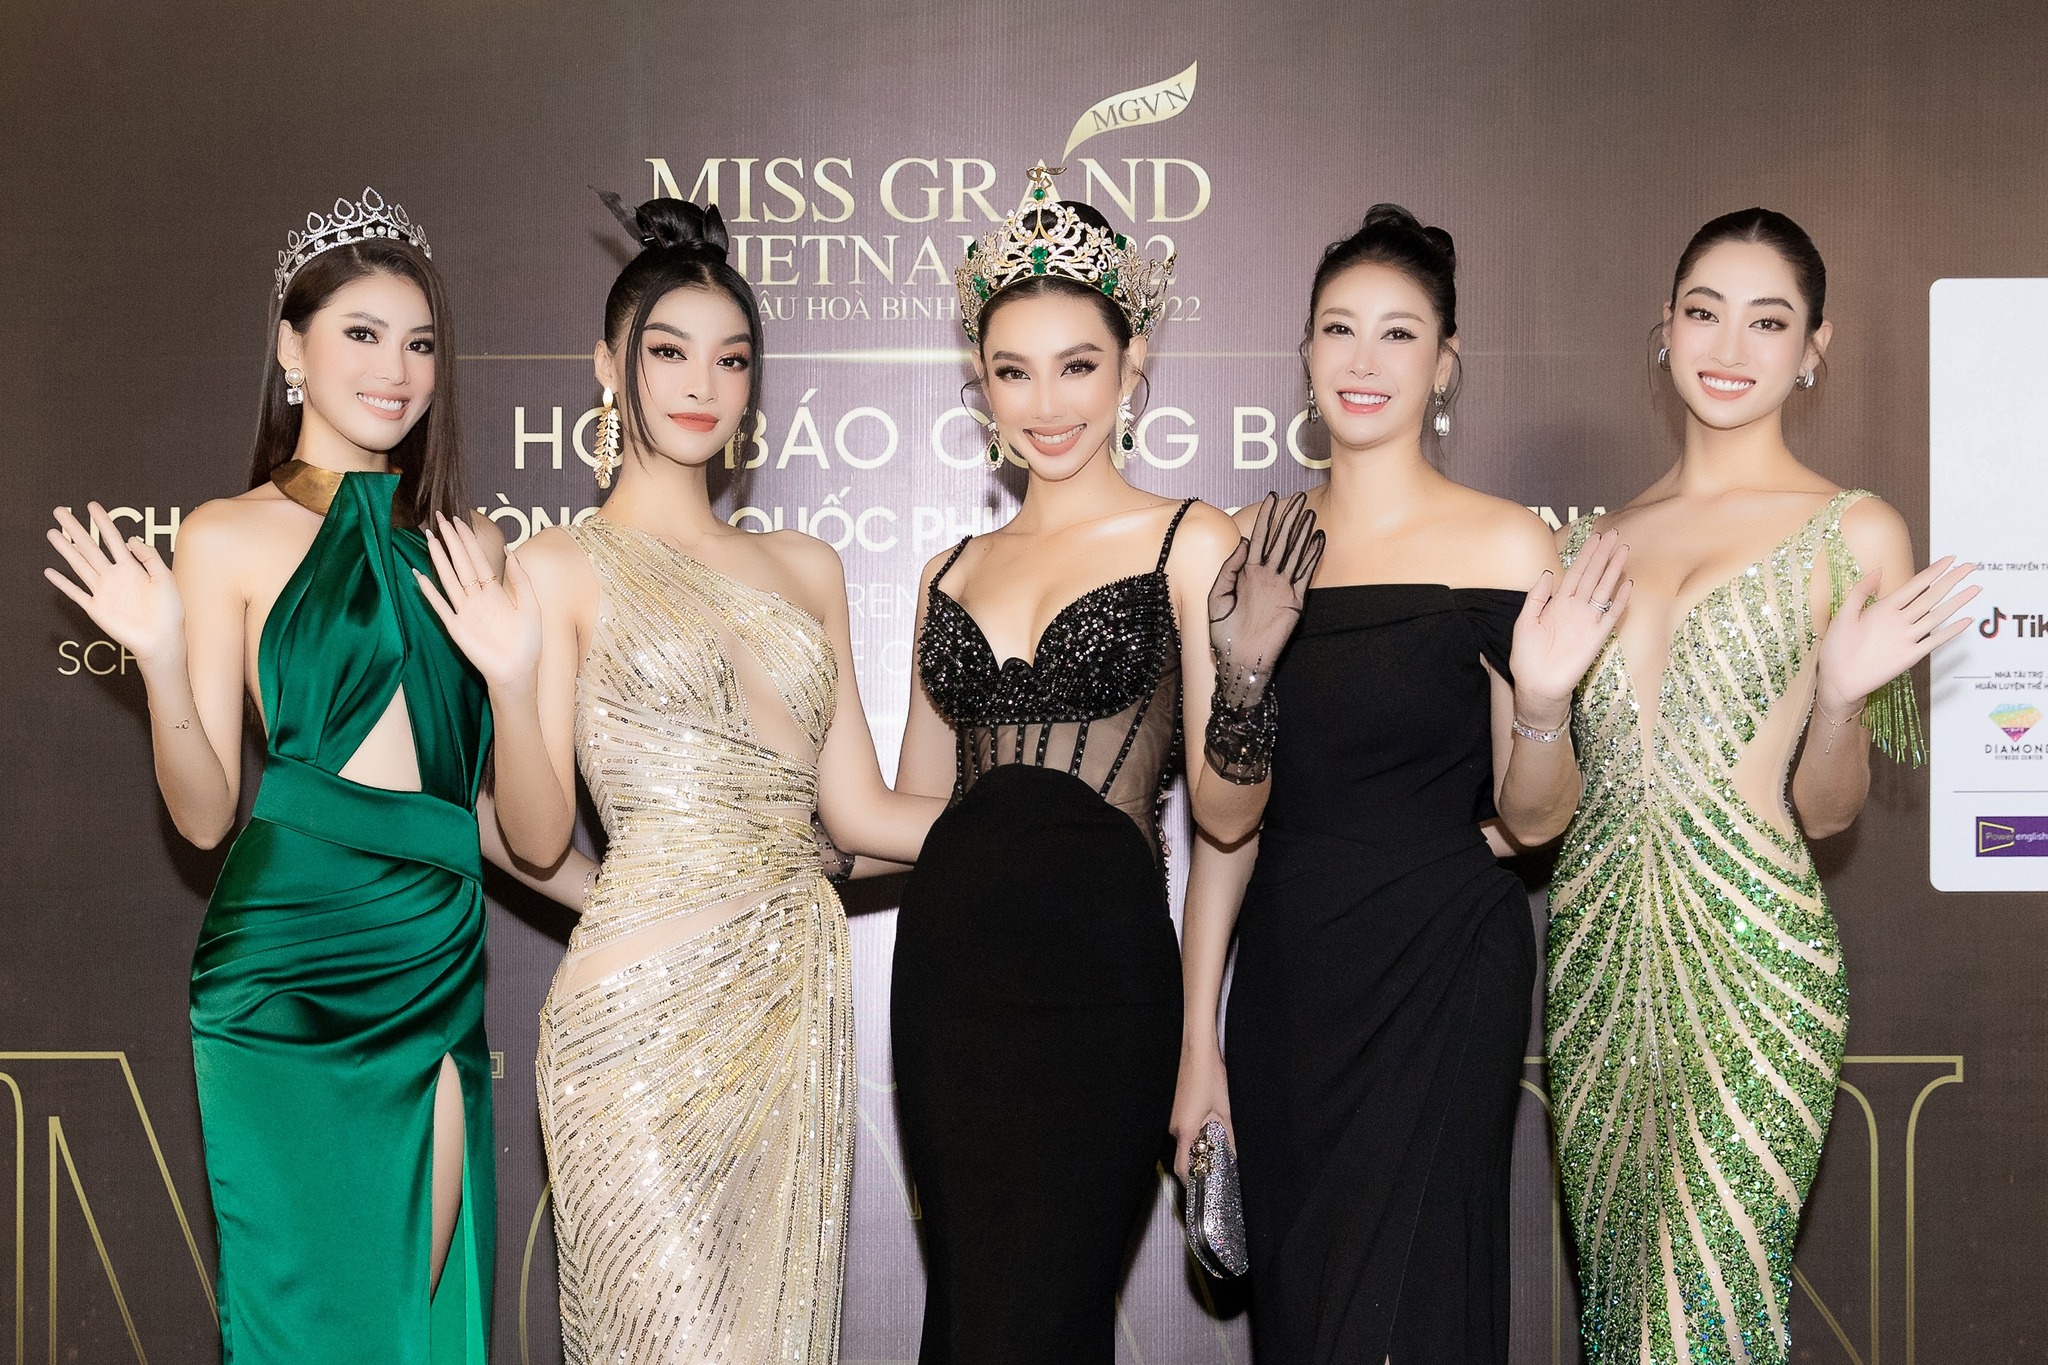 Miss Grand Vietnam 2022 holds press conference, announces schedules